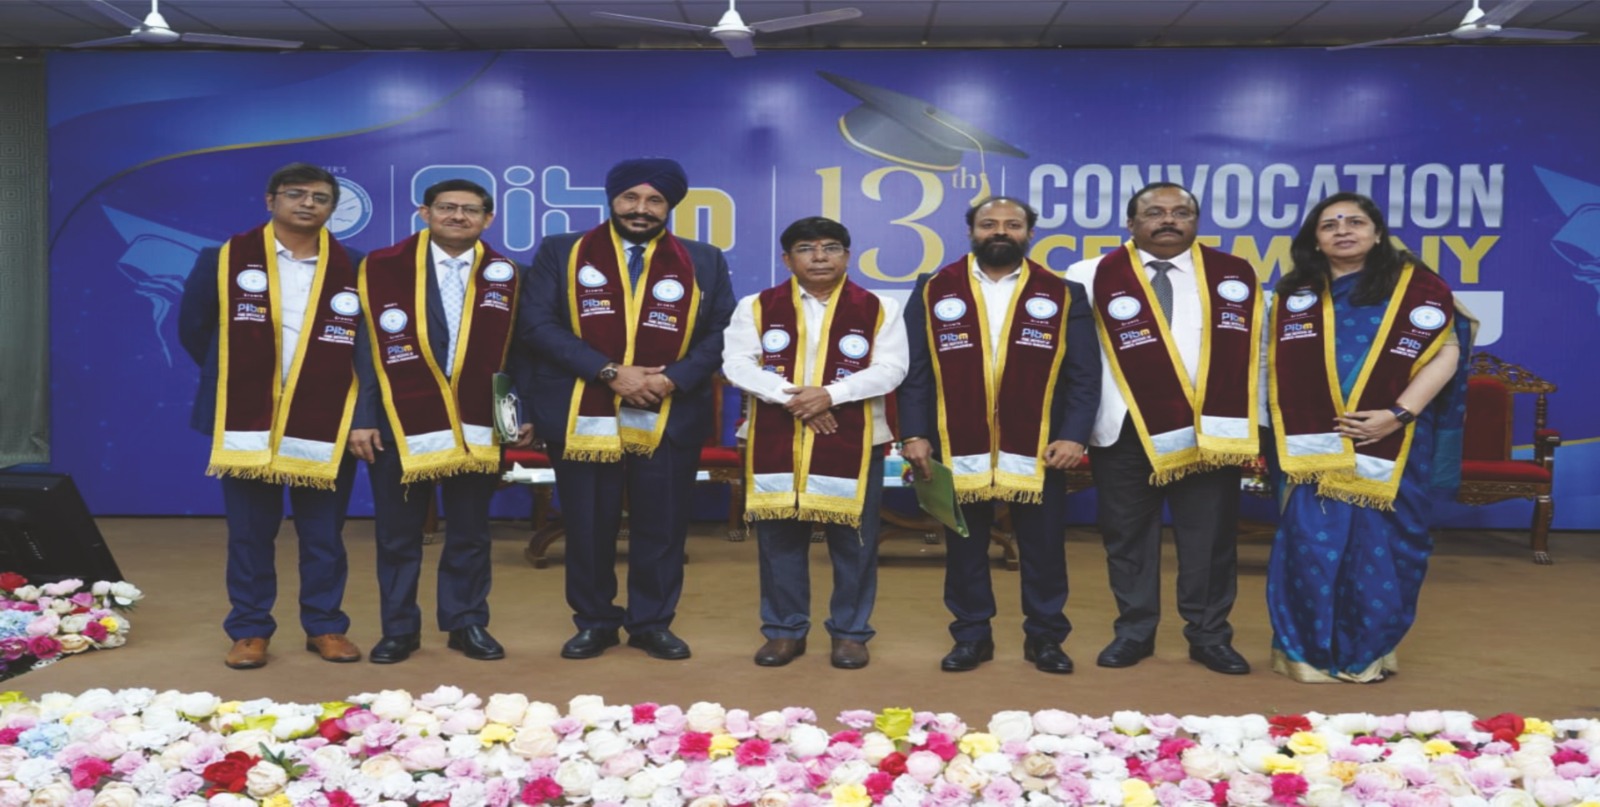 Dr J P Singh at PIBM 13th CONVOCATION with HRD Minister Government of India